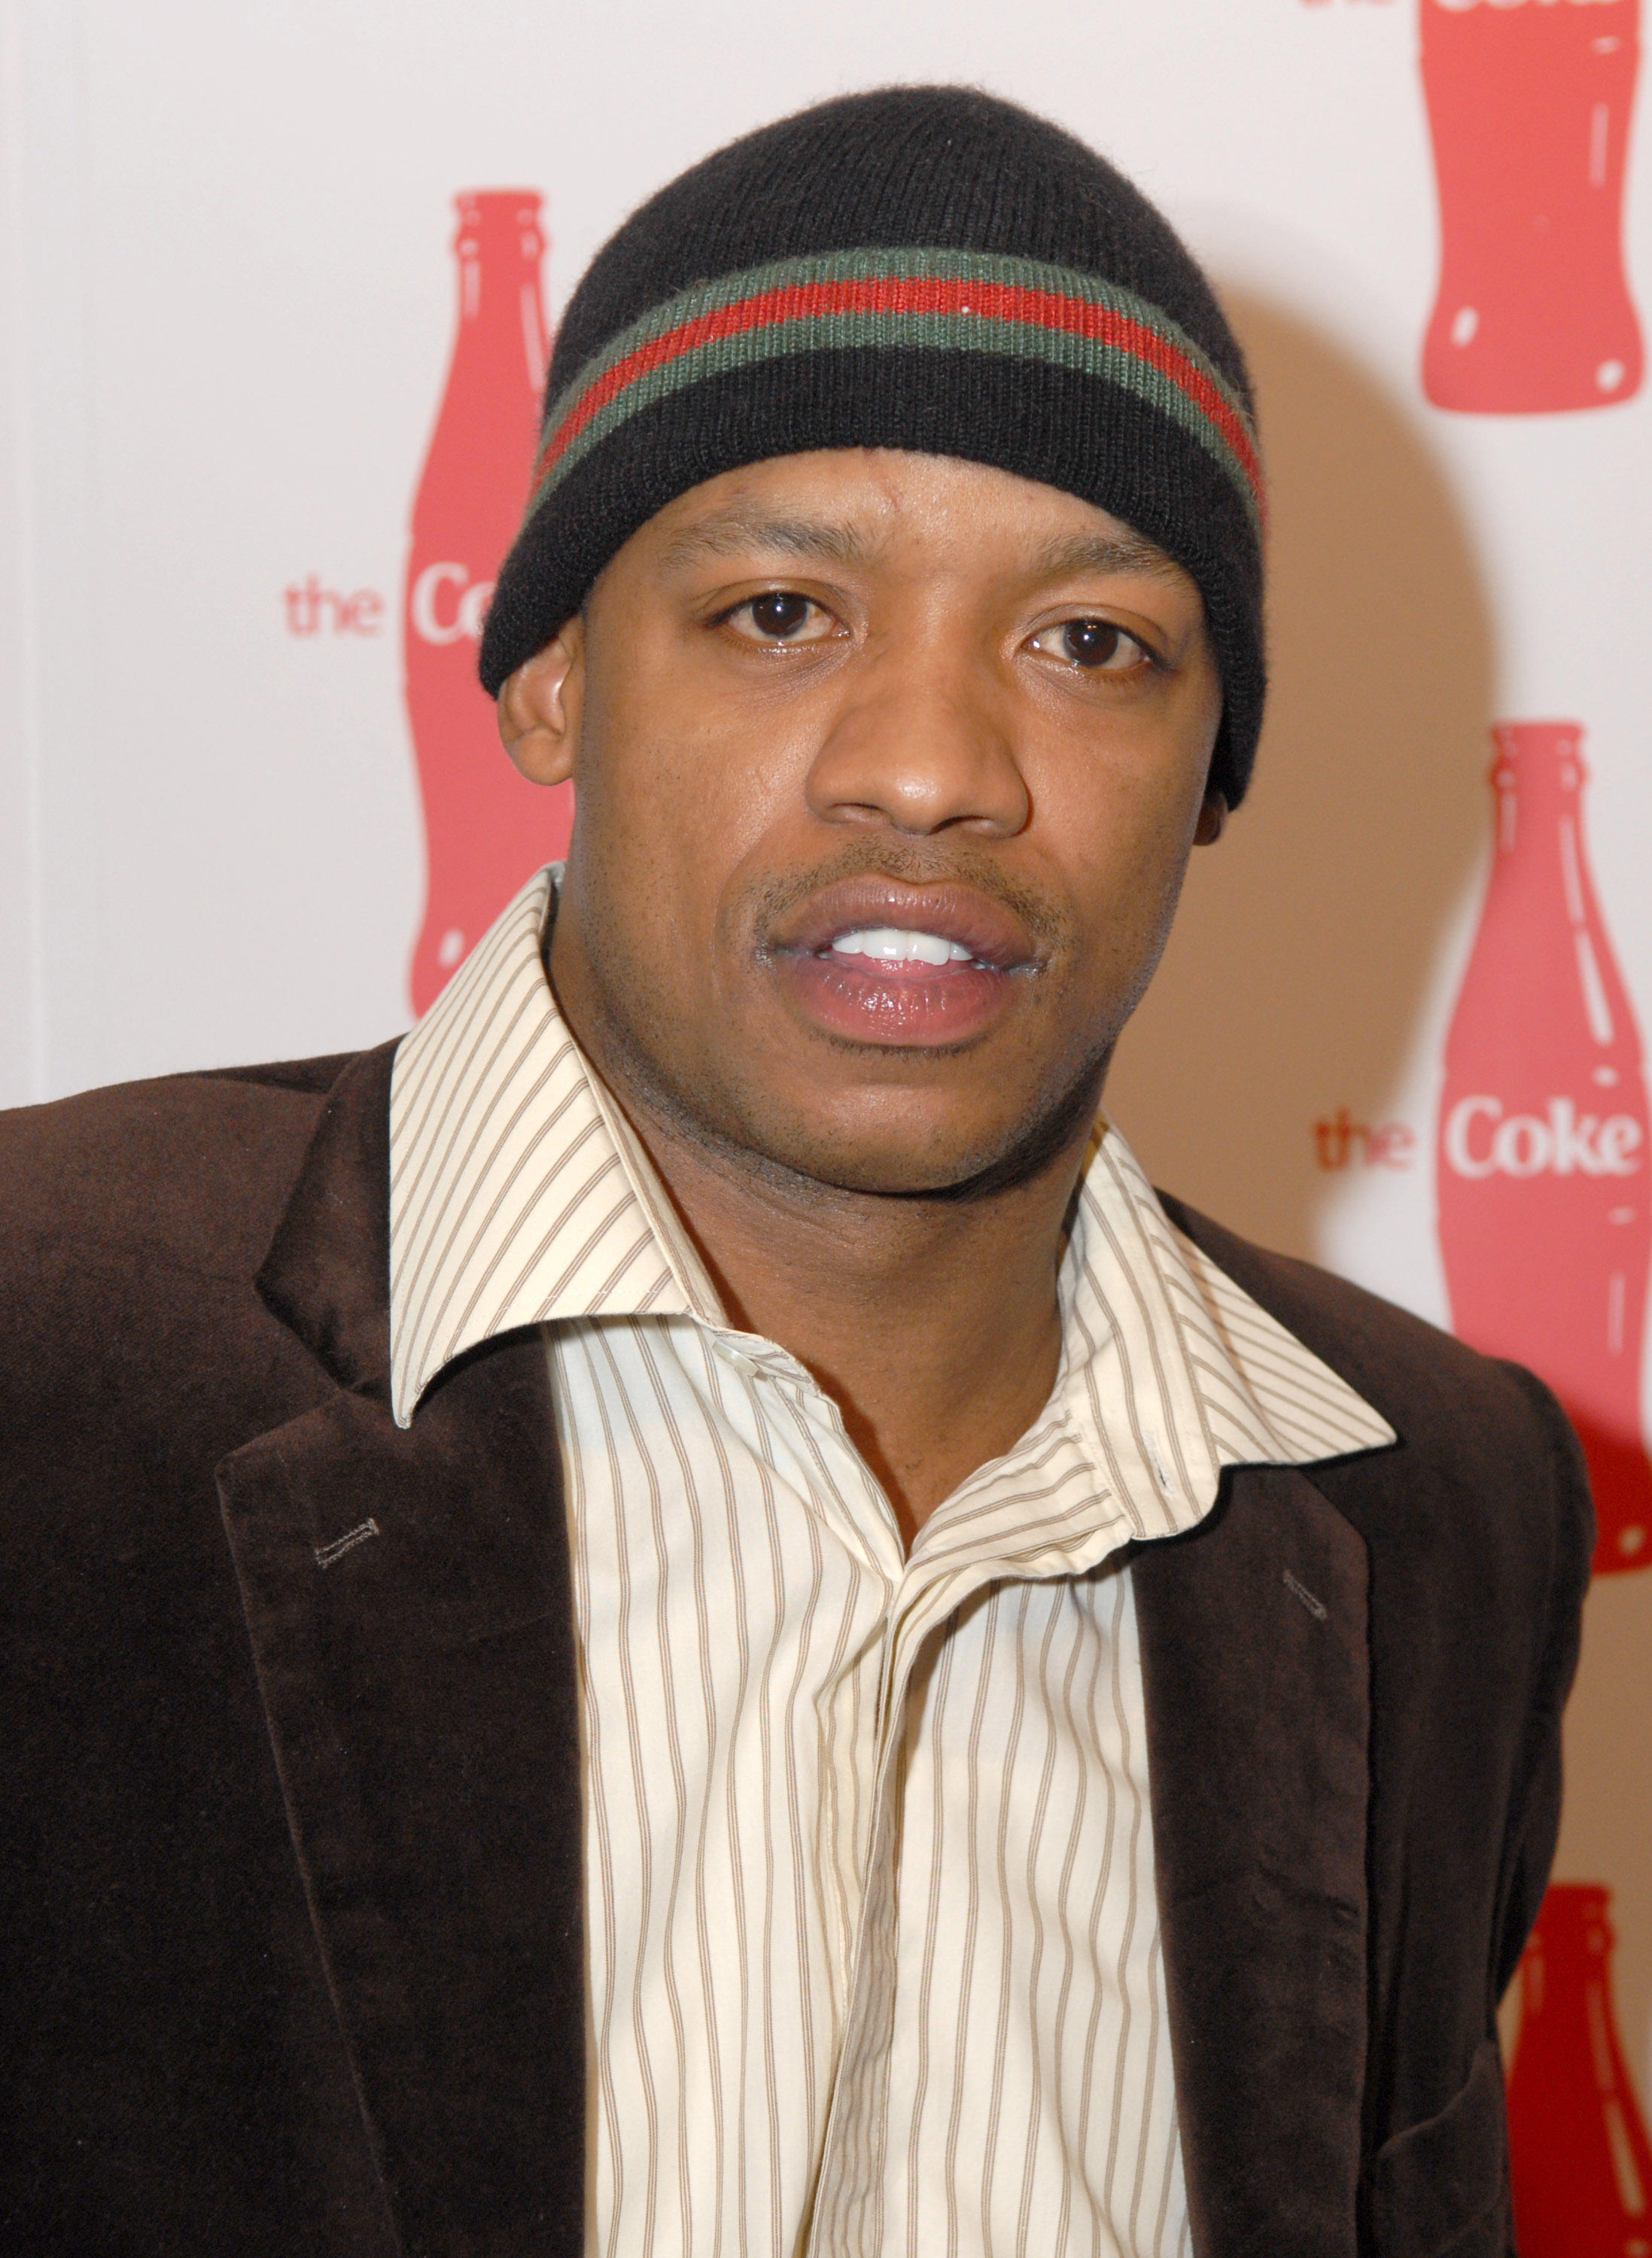 Coca-Cola's 'Coke Side Of Life' Launch Party with a Performance by Ne-Yo - March 30, 2006